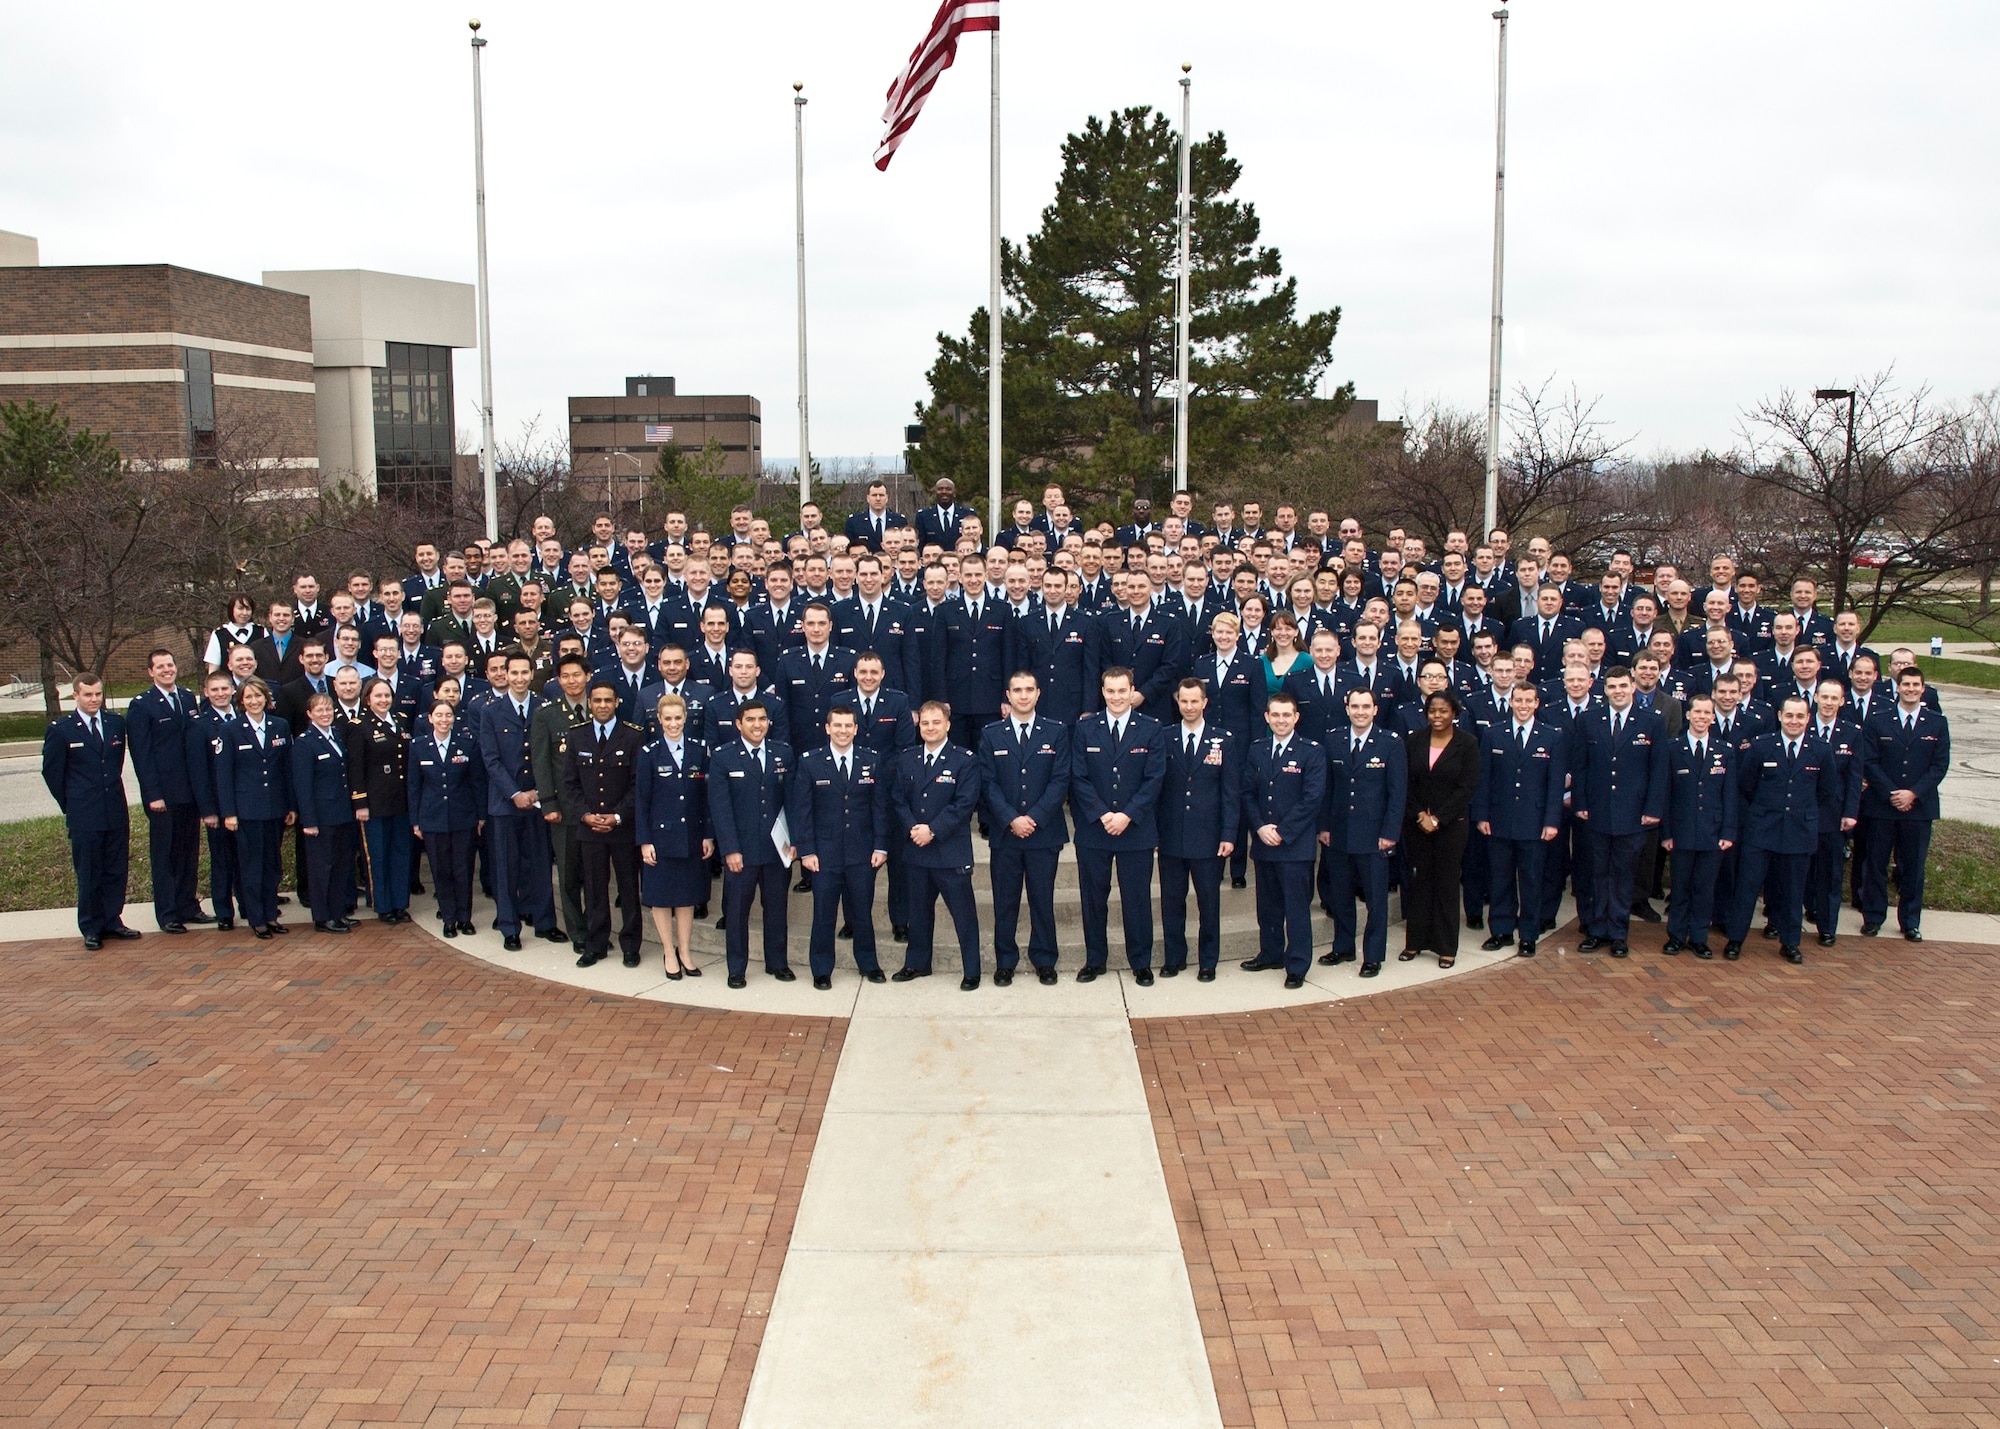 The Air Force Institute of Technology class of 2011 stands for a class photo on the AFIT campus.